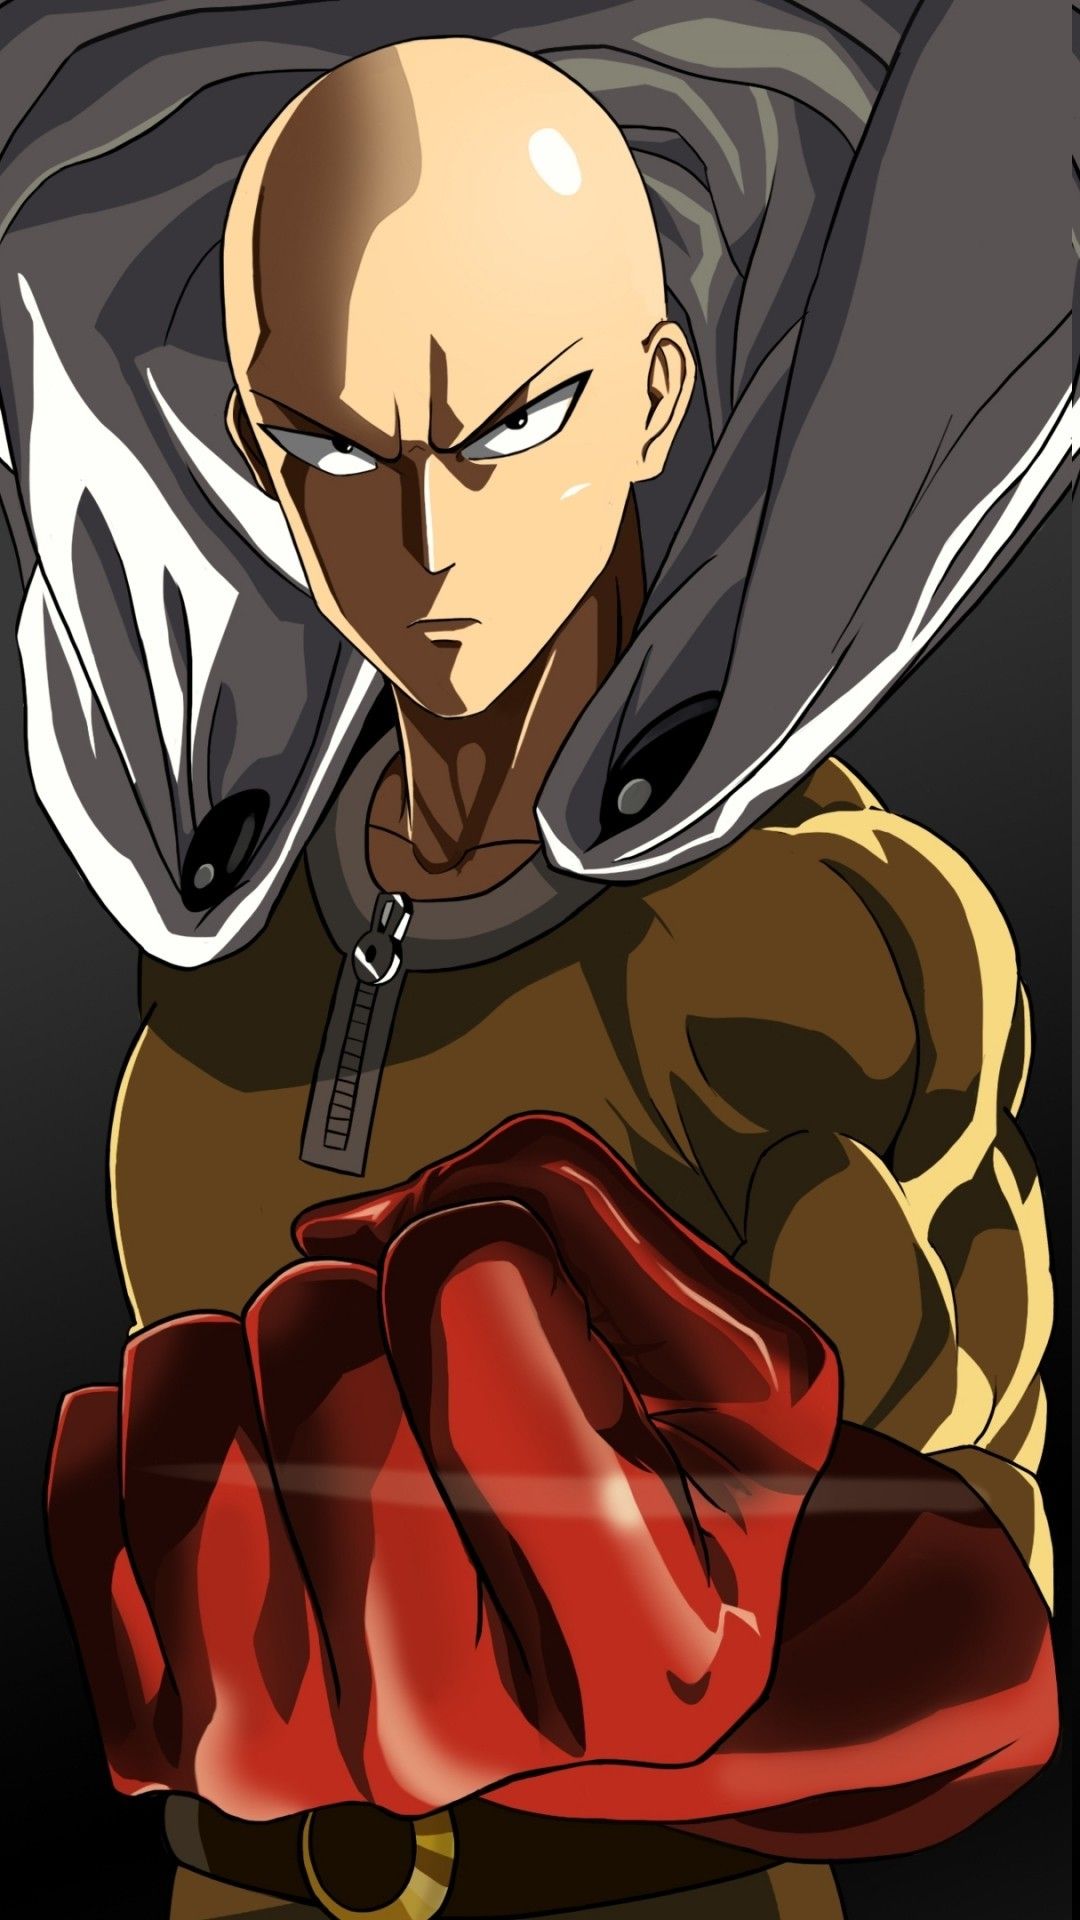 Anime One-Punch Man HD Wallpaper by SekaiNEET